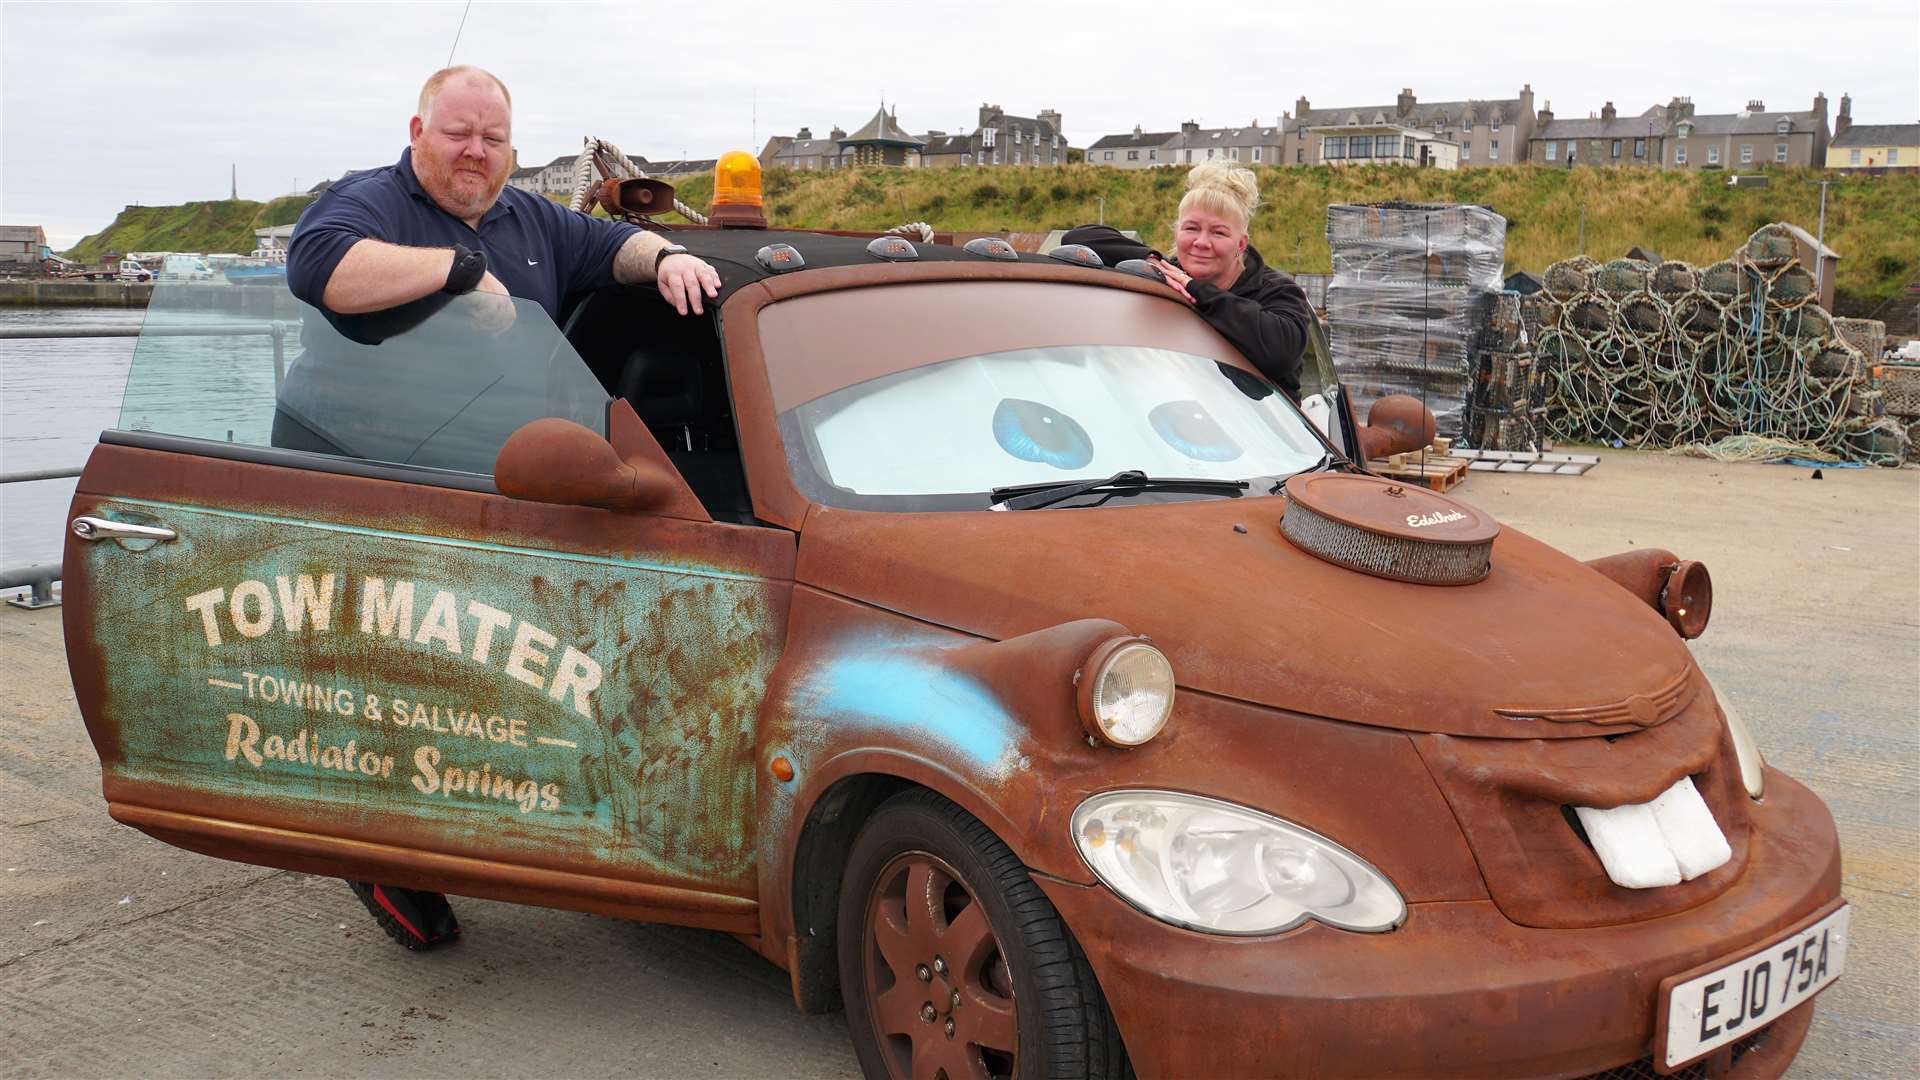 Billy and Yvonne Campbell with Tow Mater. The rust was actually sprayed on and the vehicle quite roadworthy actually.